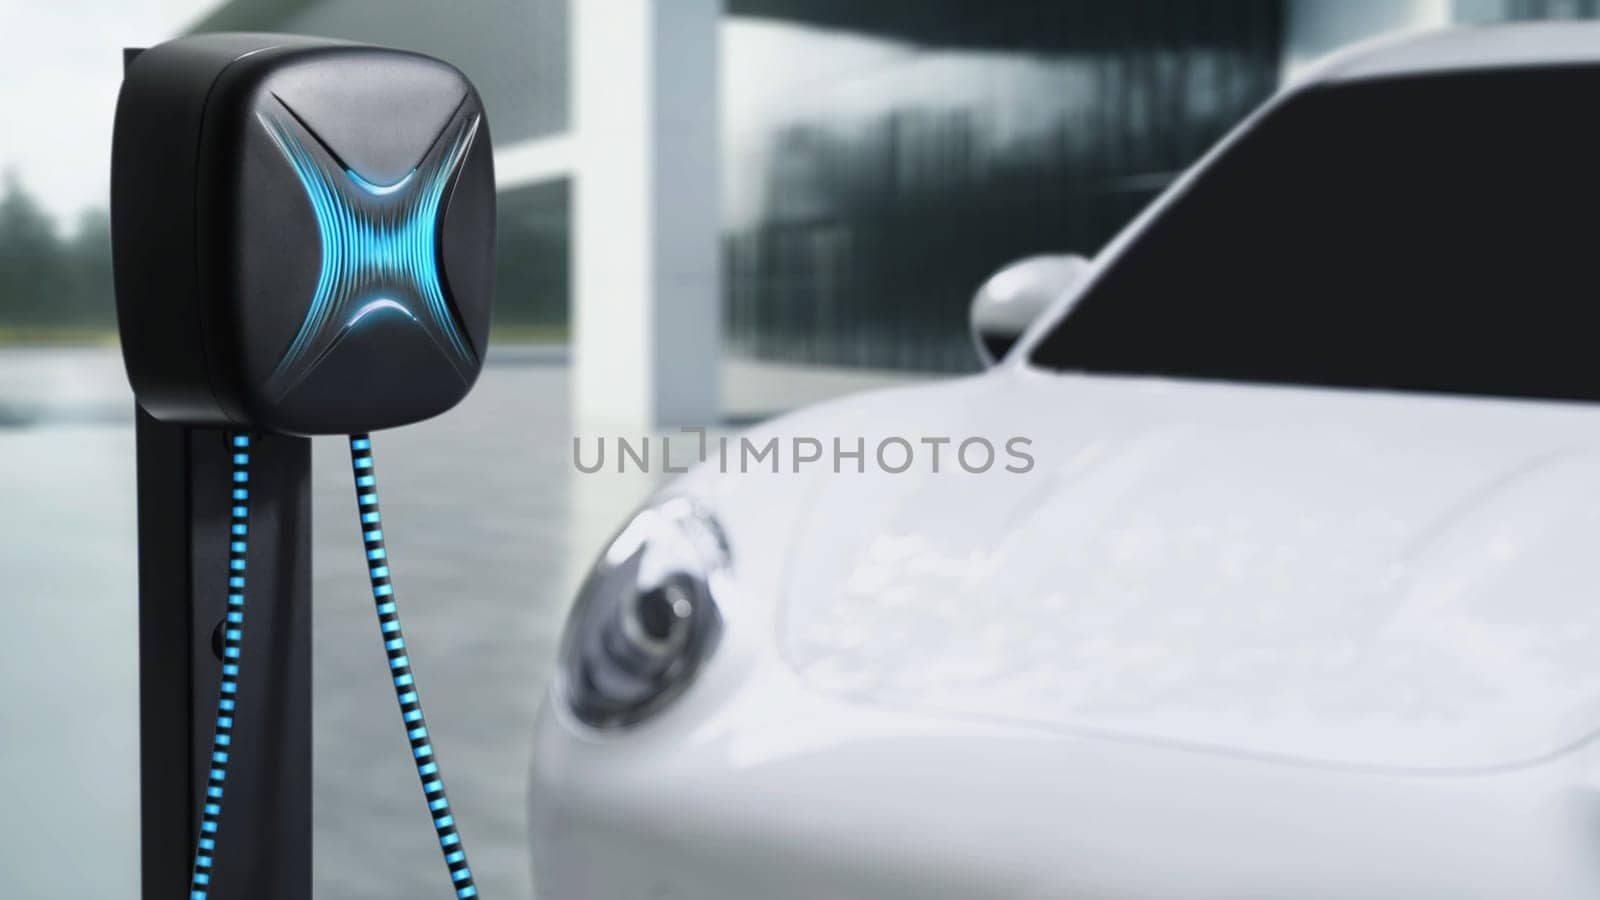 Innovative electric car connected to charging station with future architecture building background. Technological advancement rechargeable EV car using alternative clean and sustainable energy. Peruse